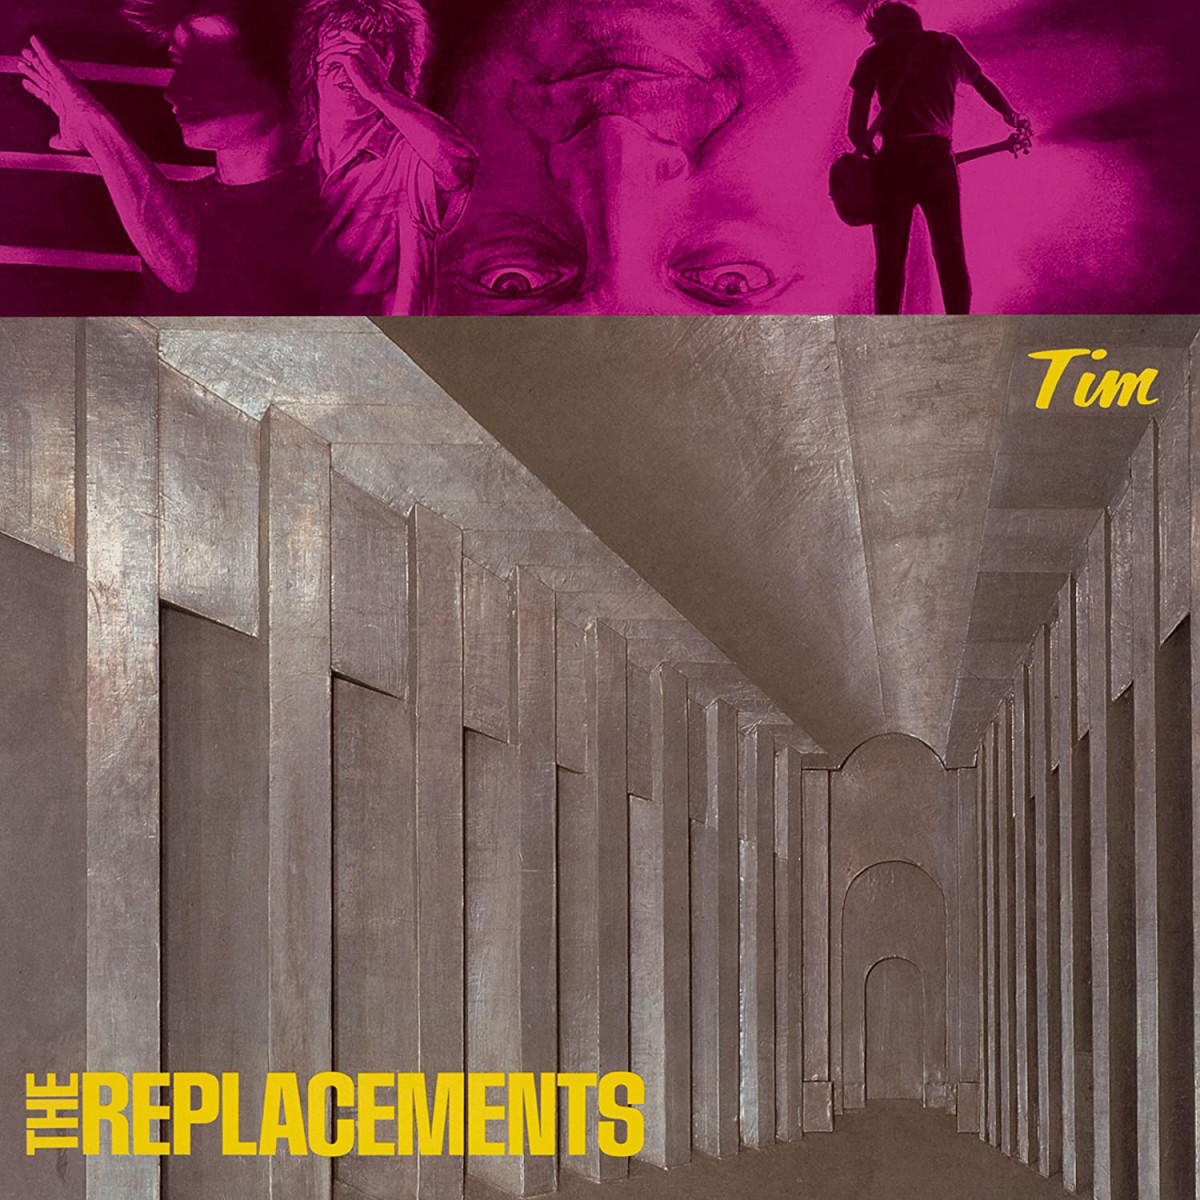 The Replacements, Tim